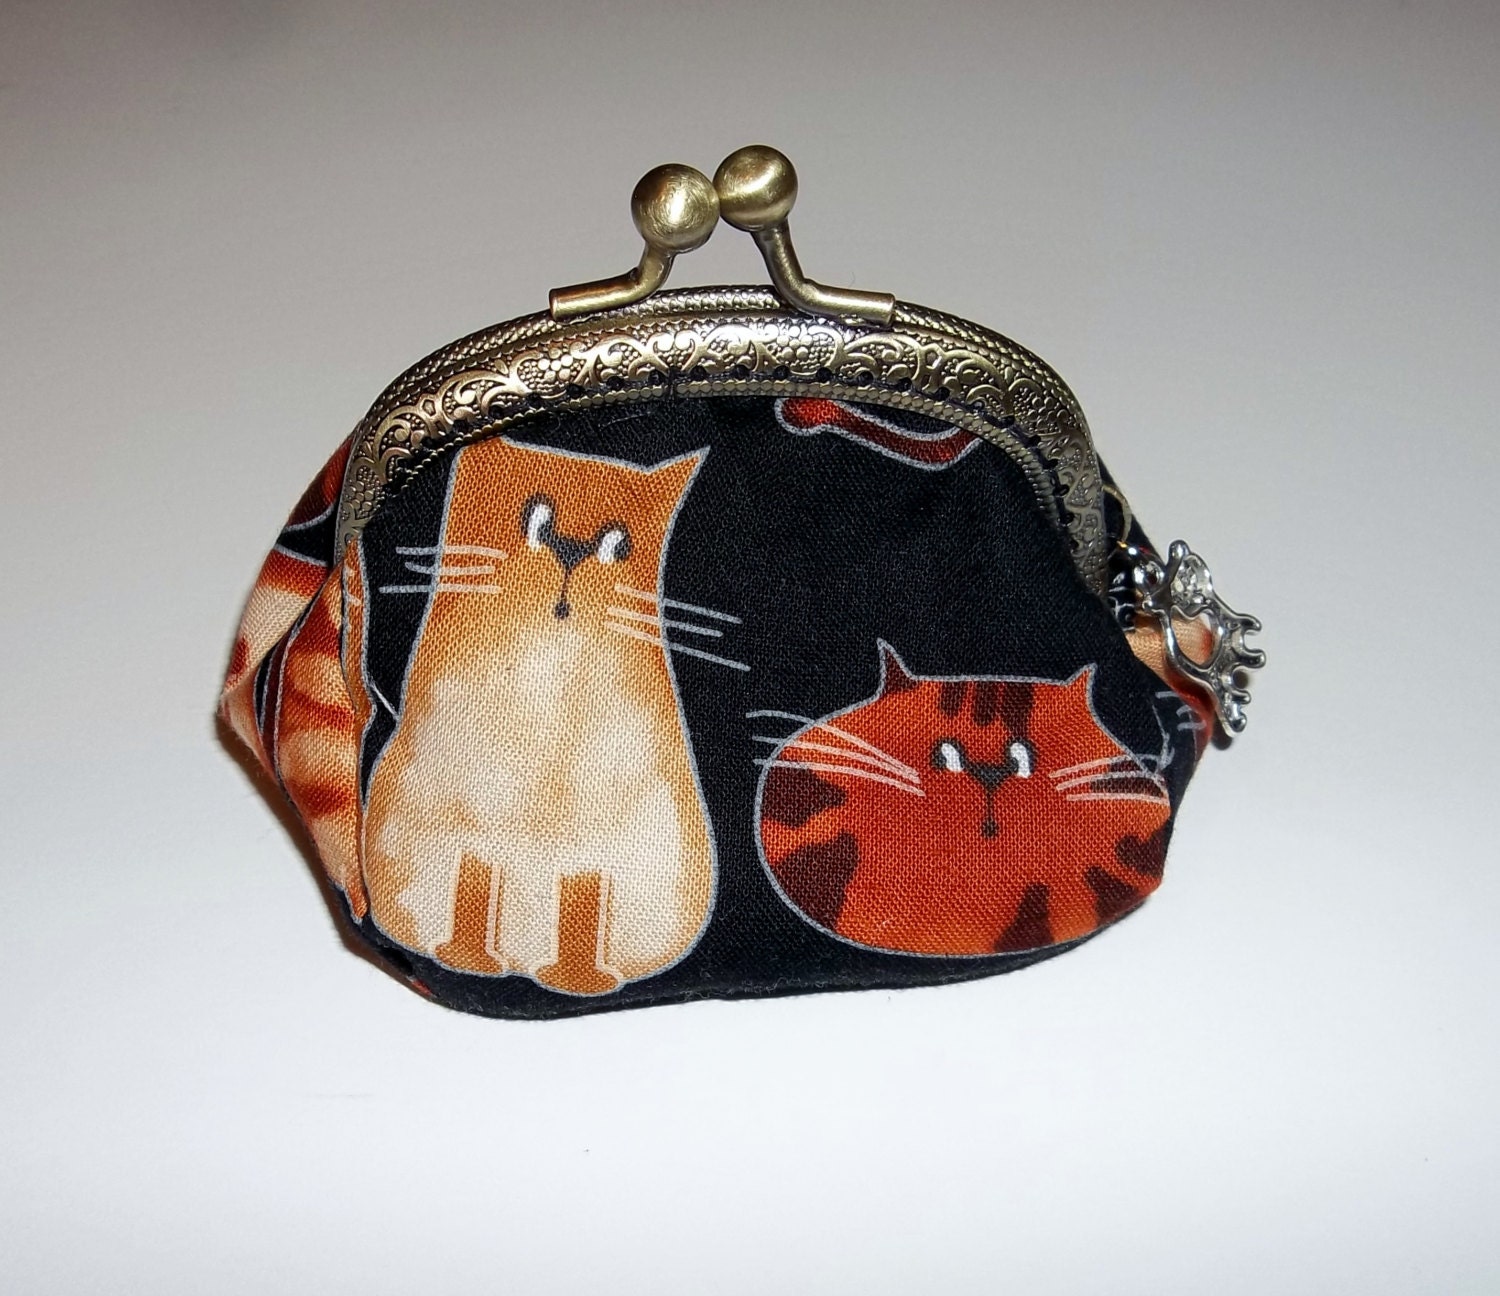 Cat Coin Purse Metal Frame coin purse by MountainMommaDesigns